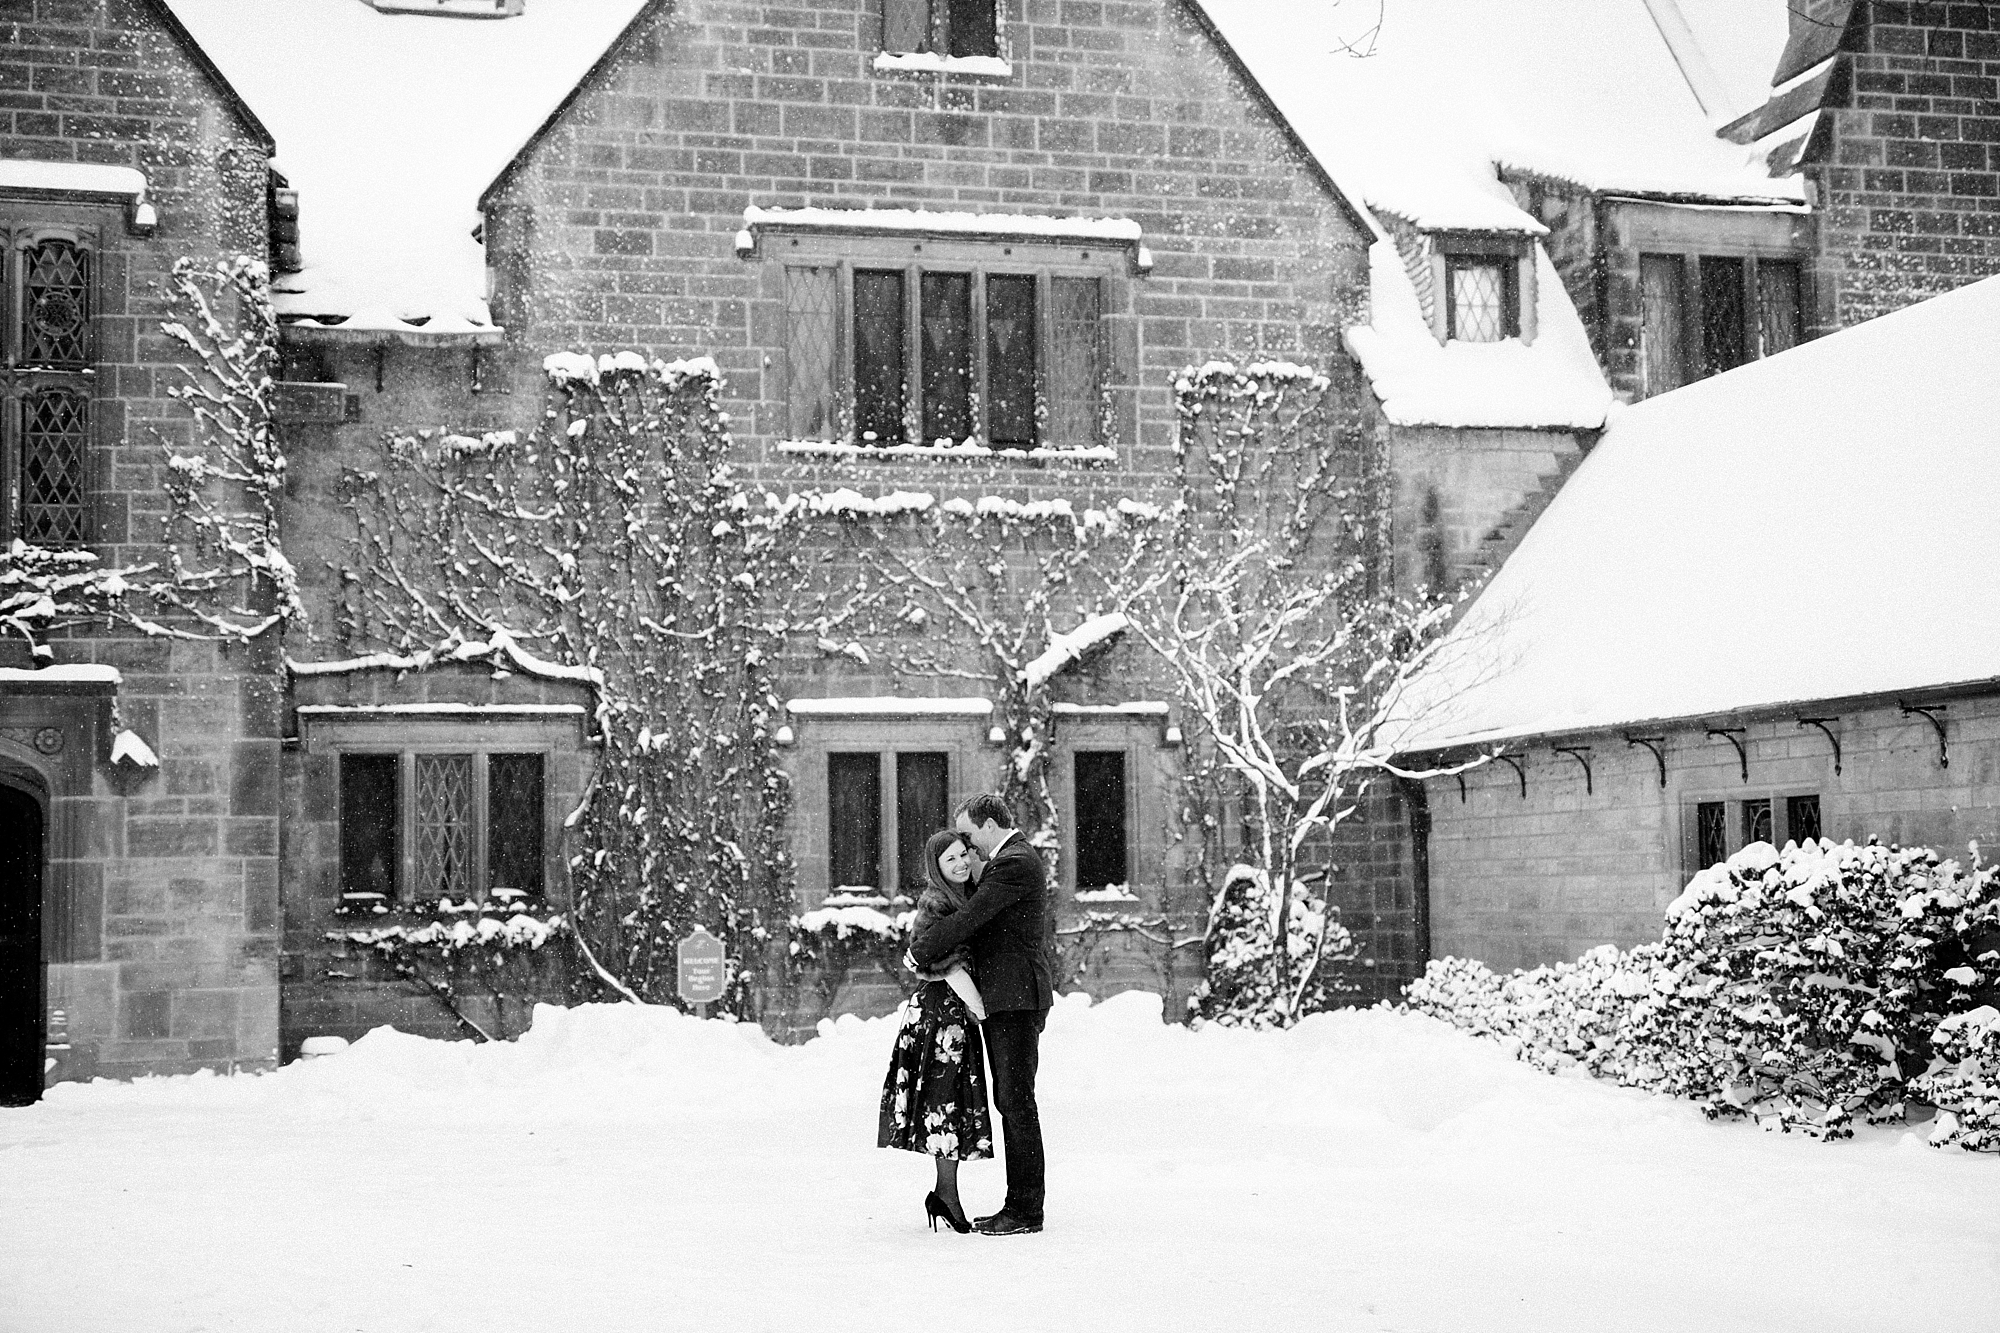 A winter engagement session filled with champagne and snowflakes at the Edsel and Eleanor Ford House in Grosse Pointe, Michigan by Breanne Rochelle Photography.